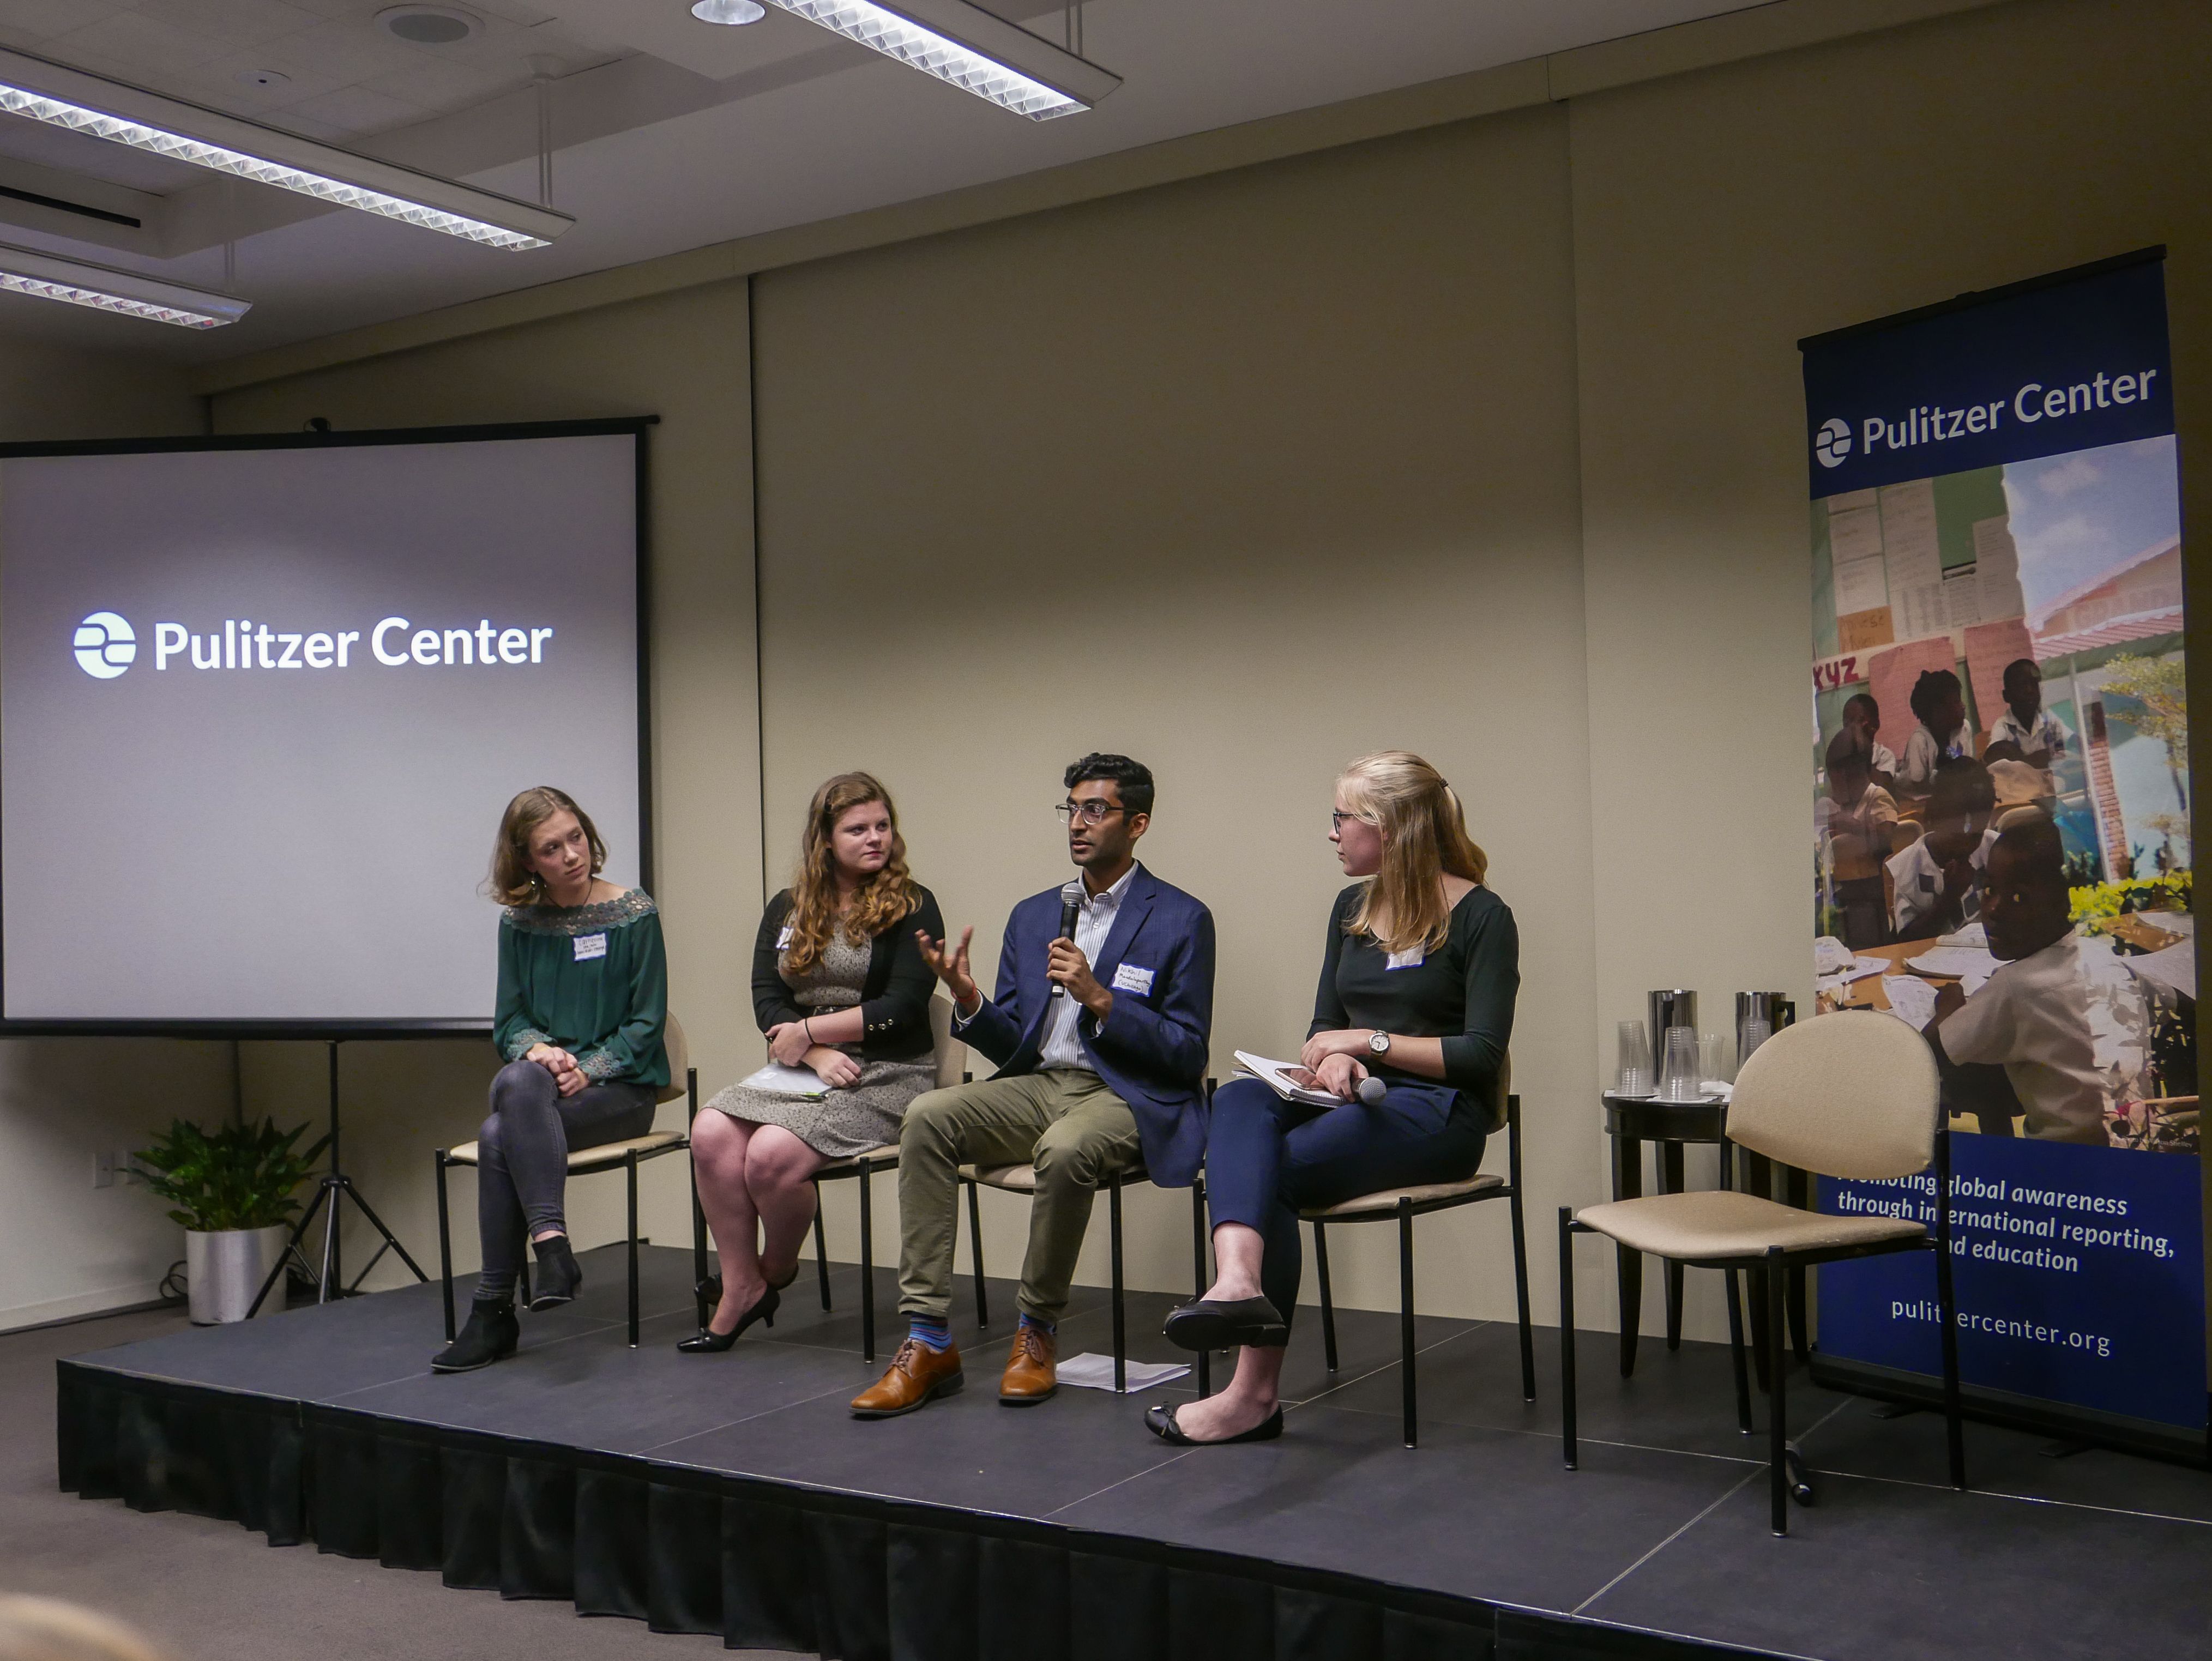 Nikhil Mandalaparthy (University of Chicago) responds to an audience questions alongside fellow panelists Catherine Cartier (Davidson College), Kaitlyn Johnson (Georgetown University), and Lily Moore-Eissenberg (Yale University) during the "Impact of Religion" panel on Day One of Washington Weekend. Image by Meerabelle Jesuthasan. United States, 2019.